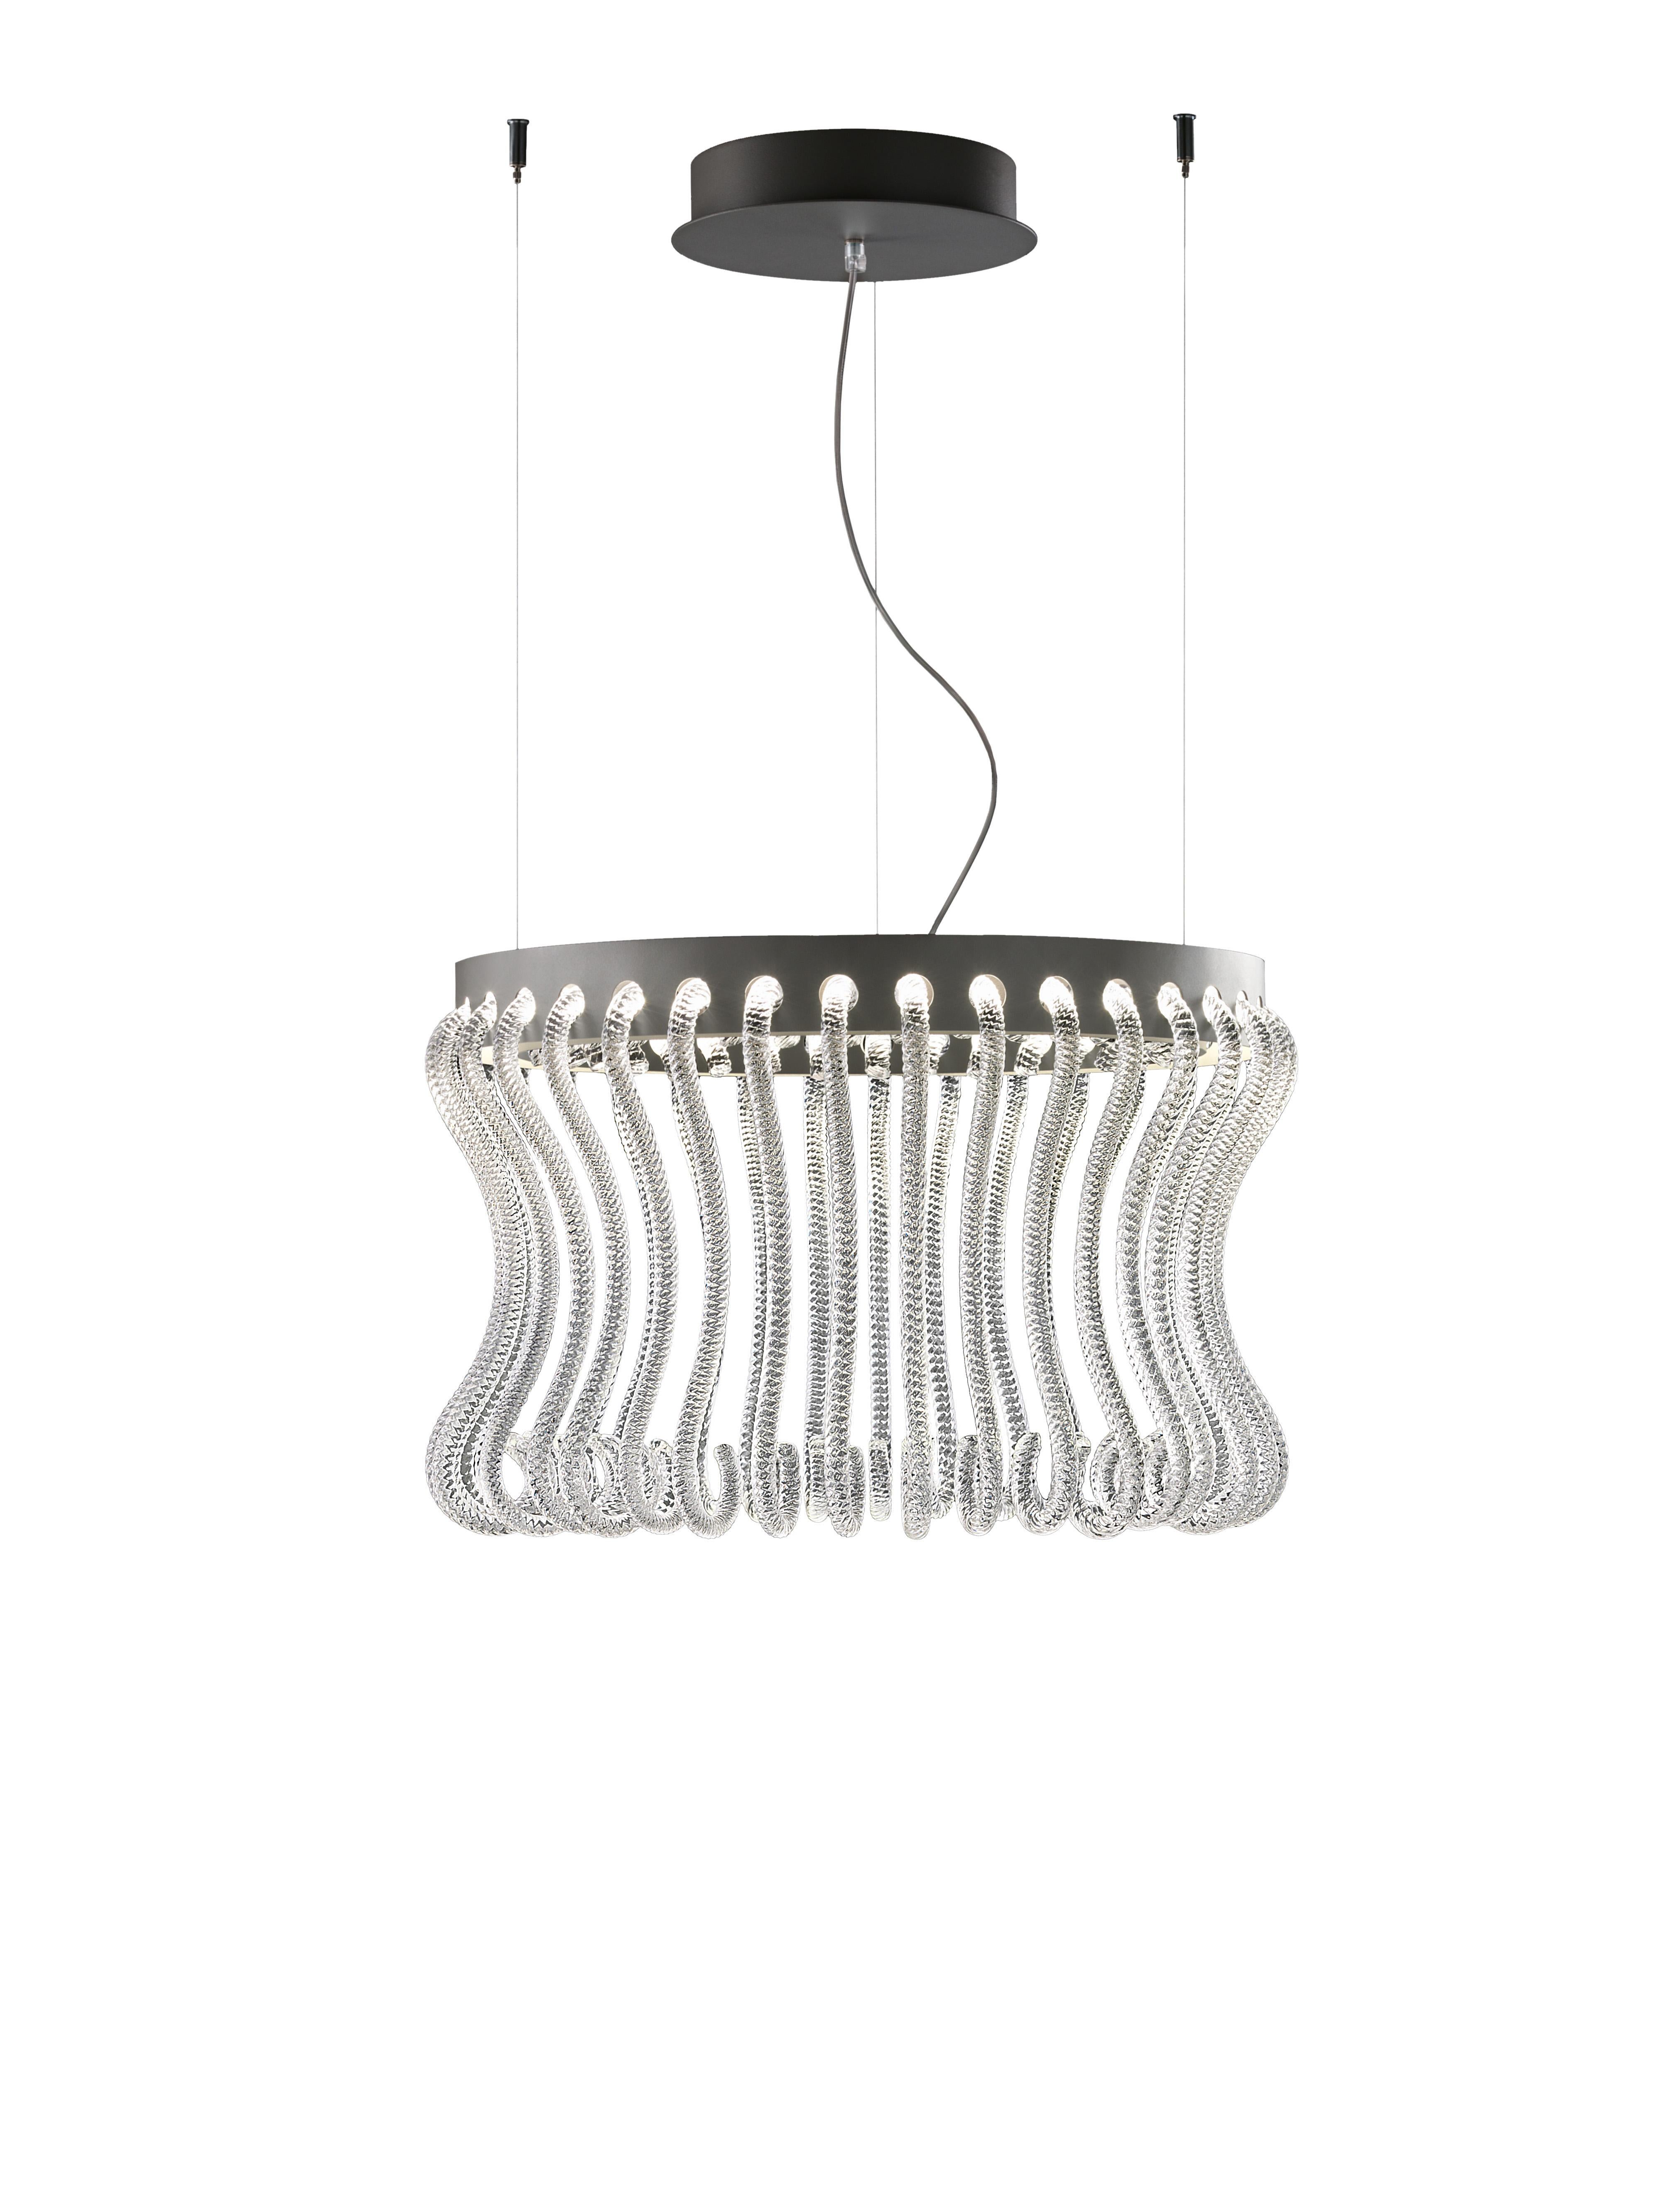 Crown 7334 Suspension Lamp in Glass, by Brian Rasmussen from Barovier&Toso